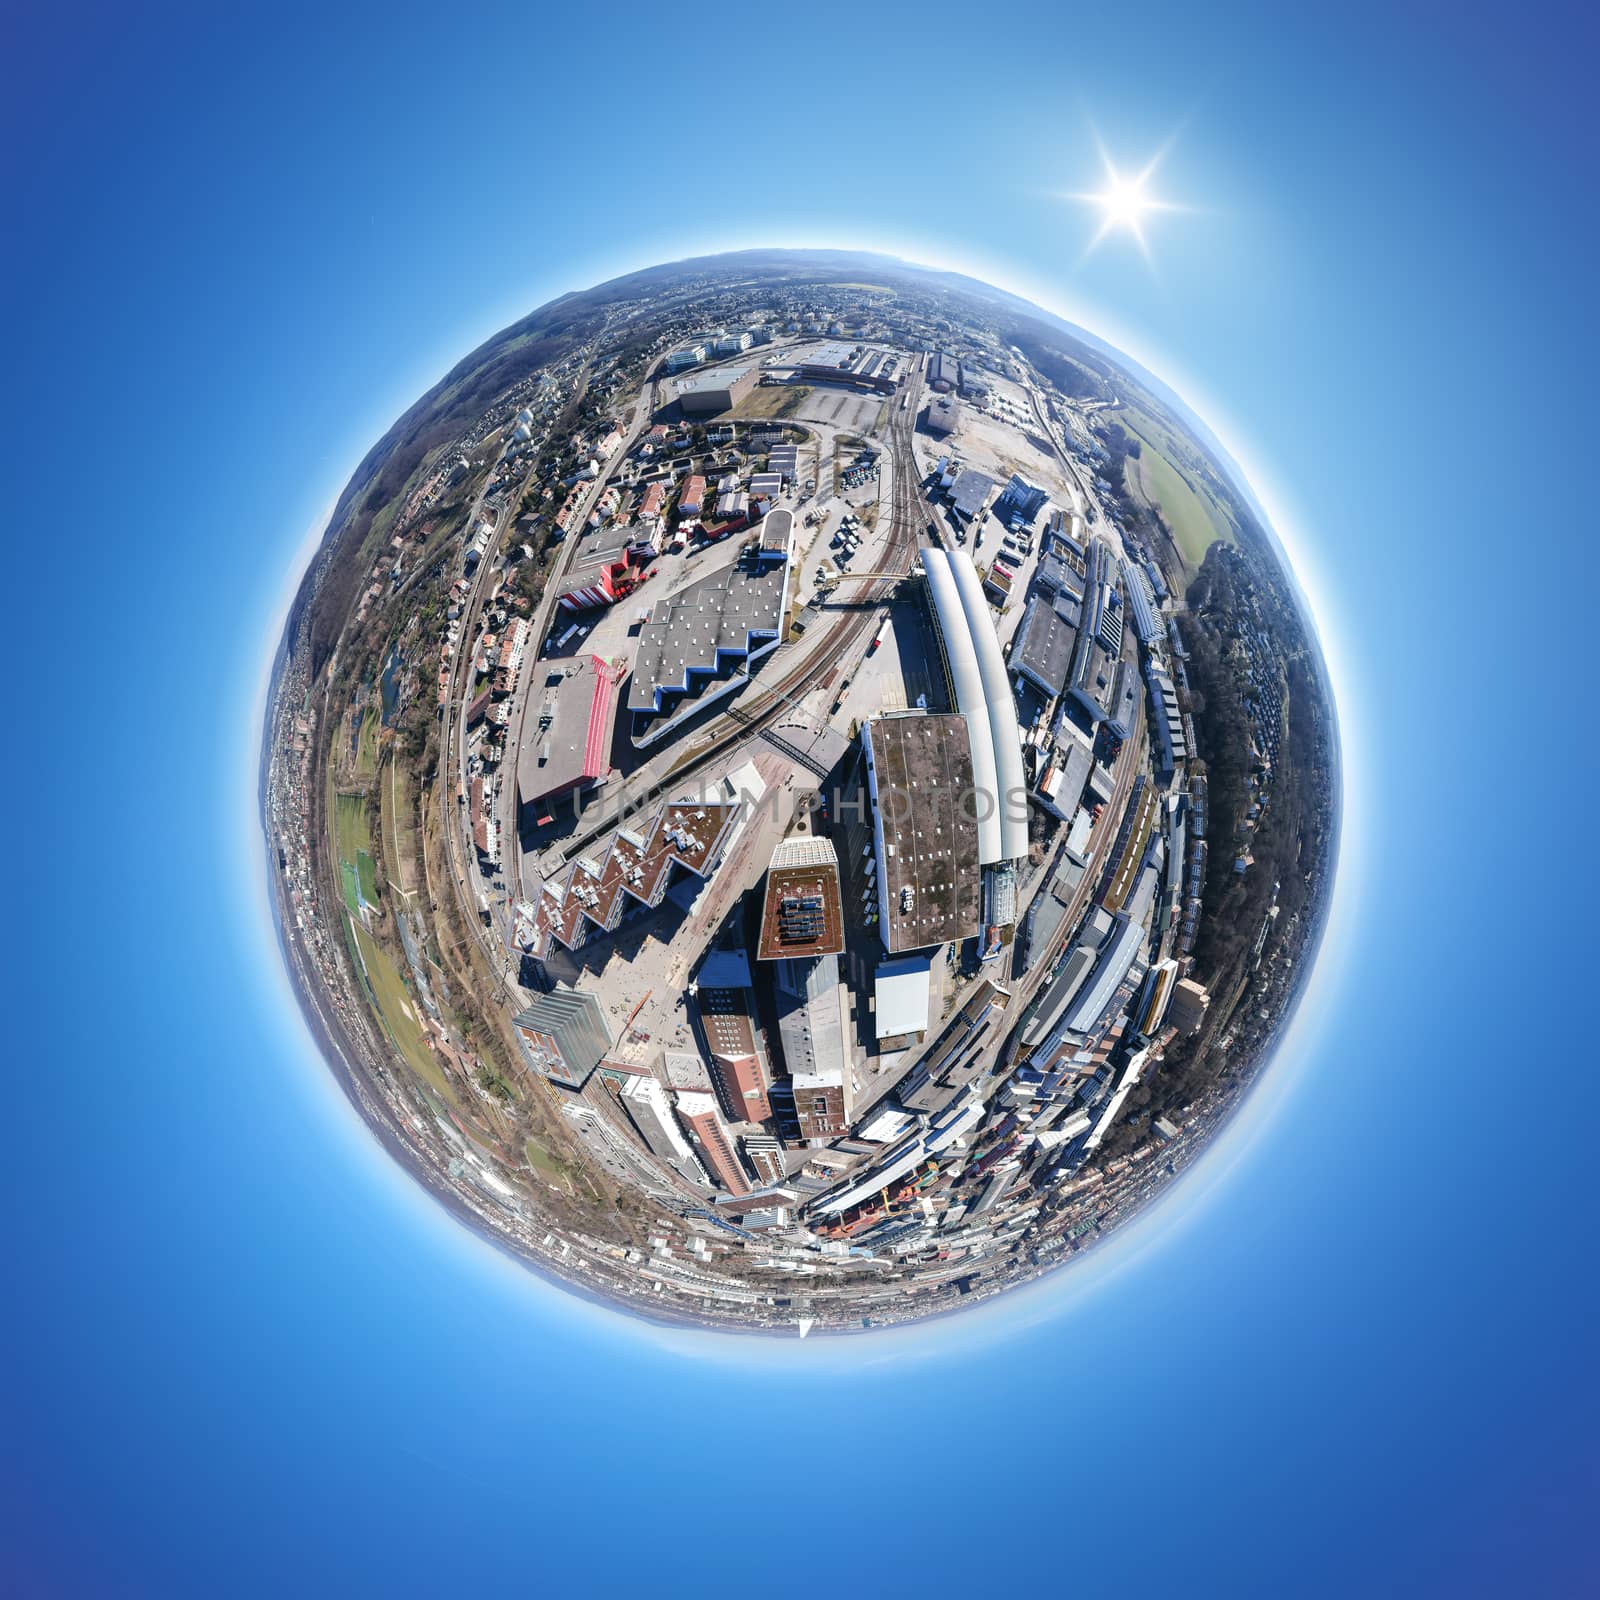 An image of a little planet of Basel Swiss